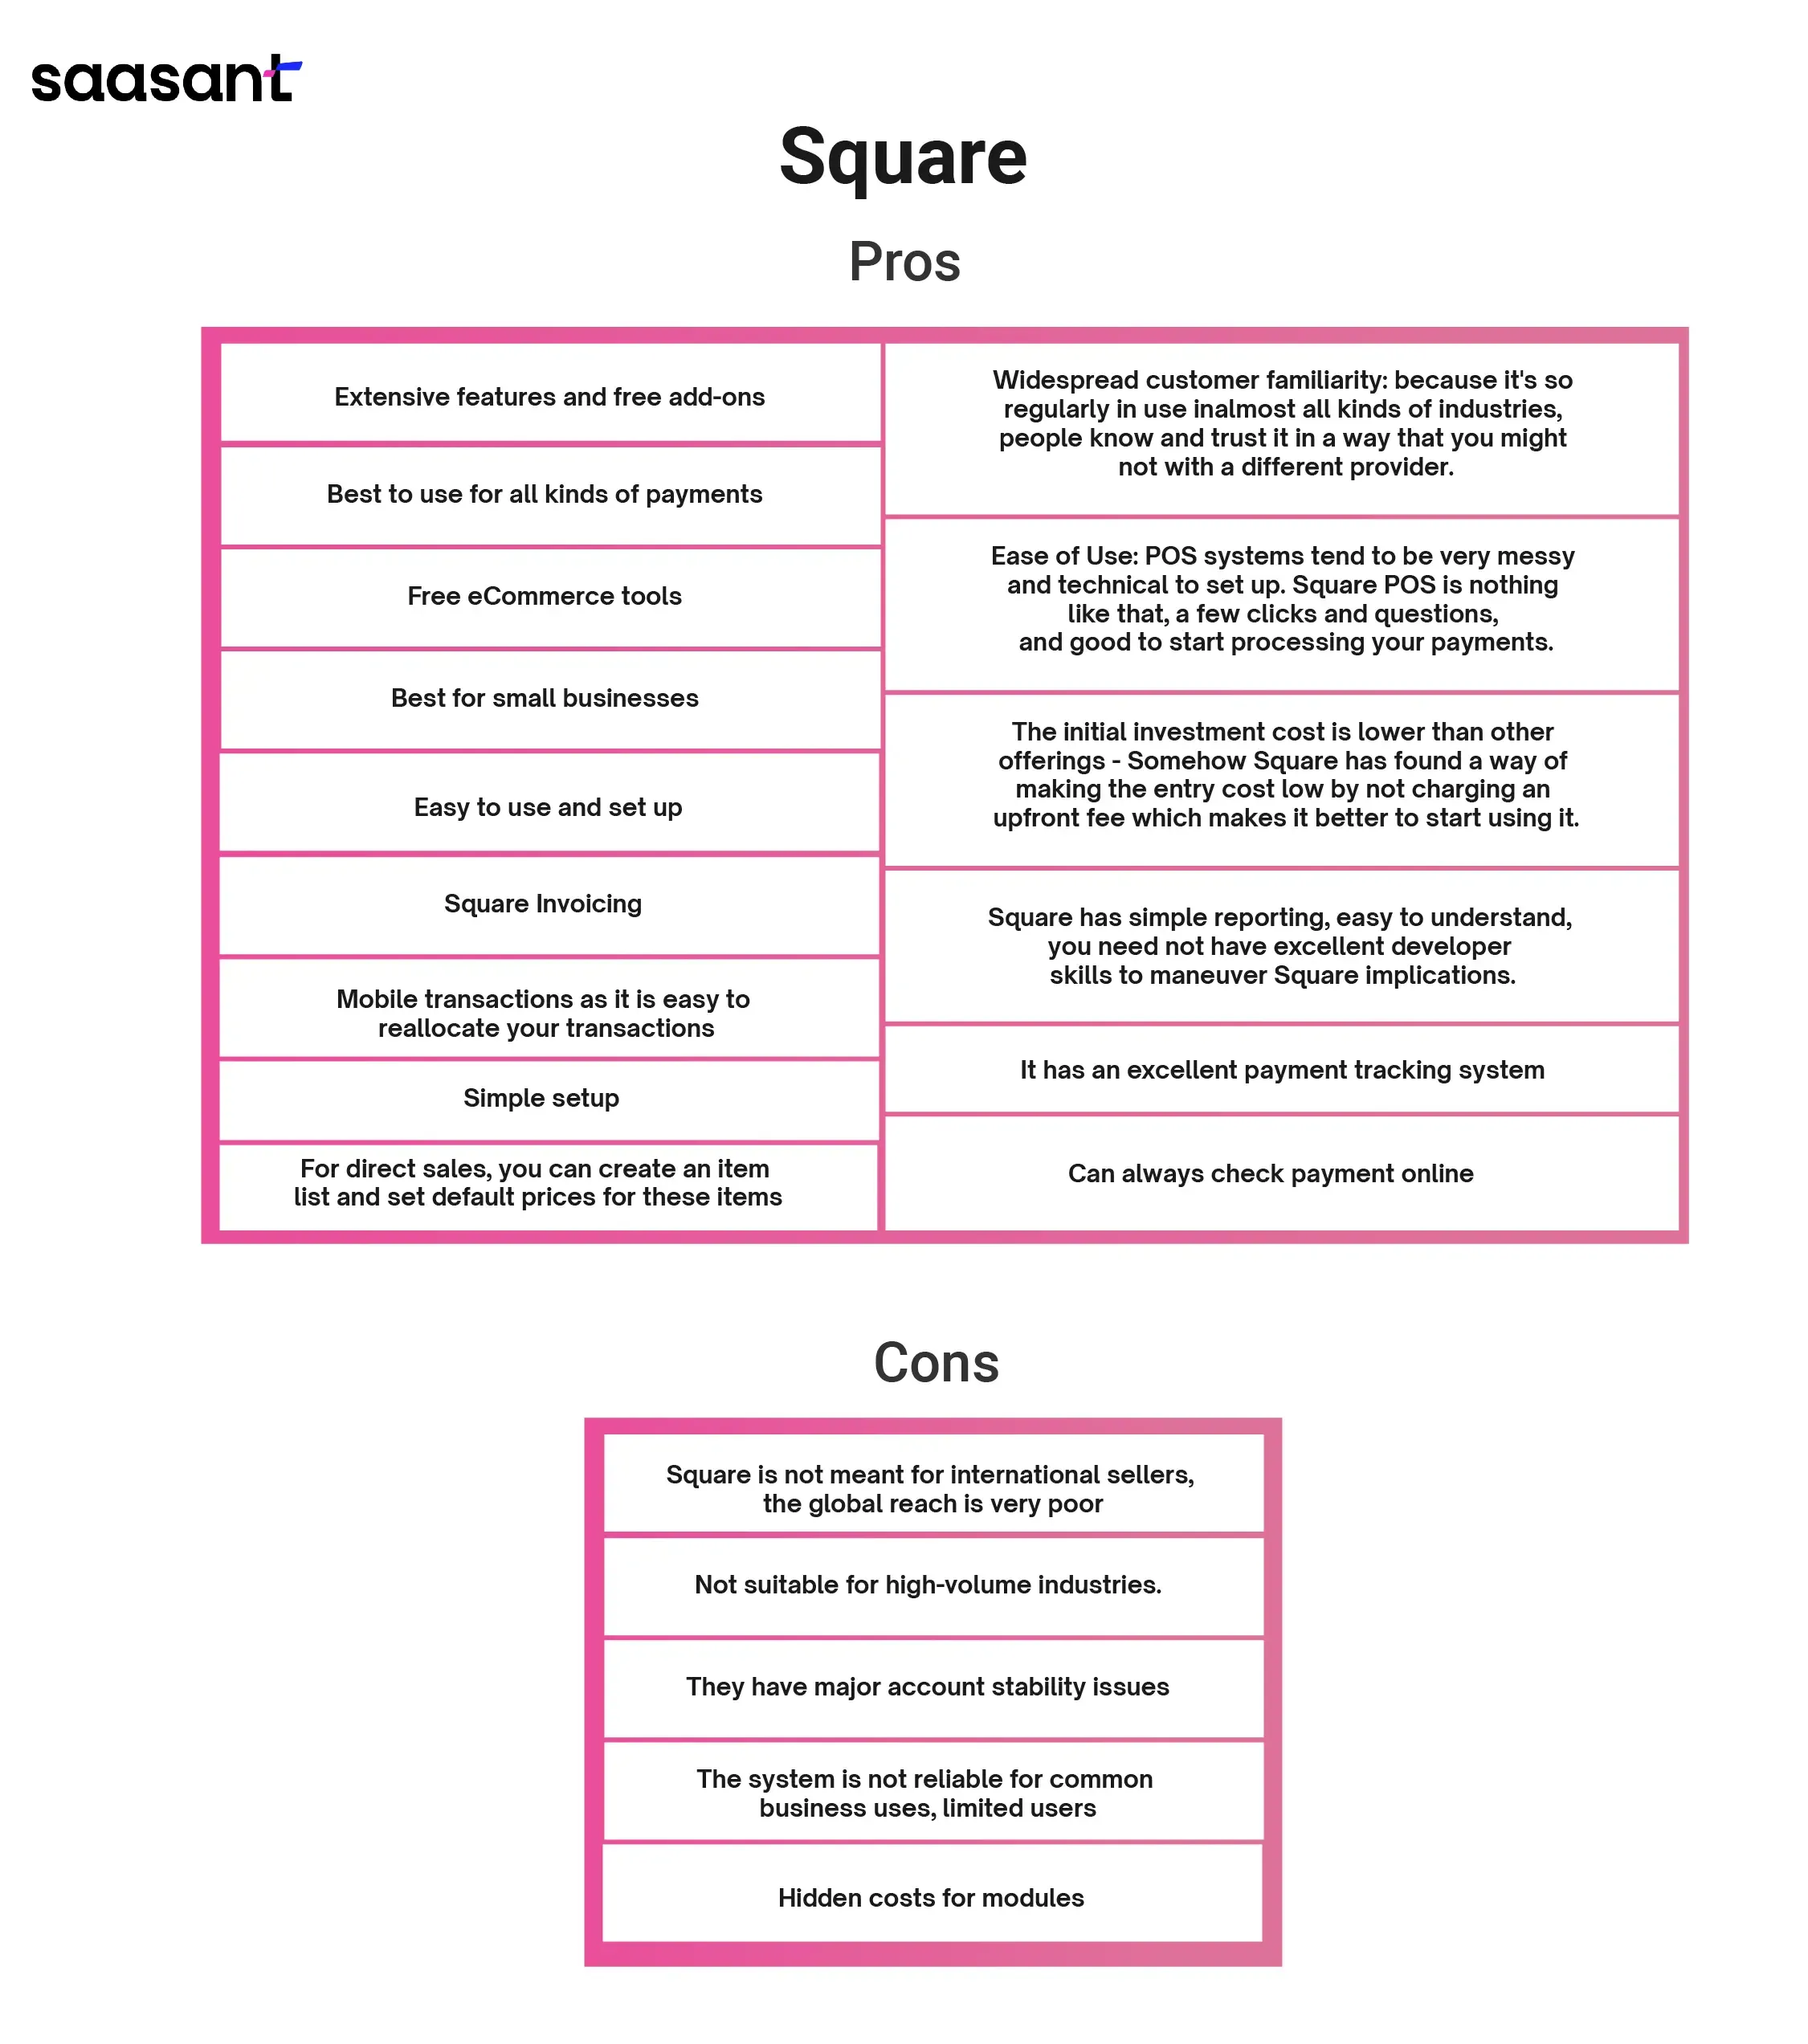 Square Pros and Cons